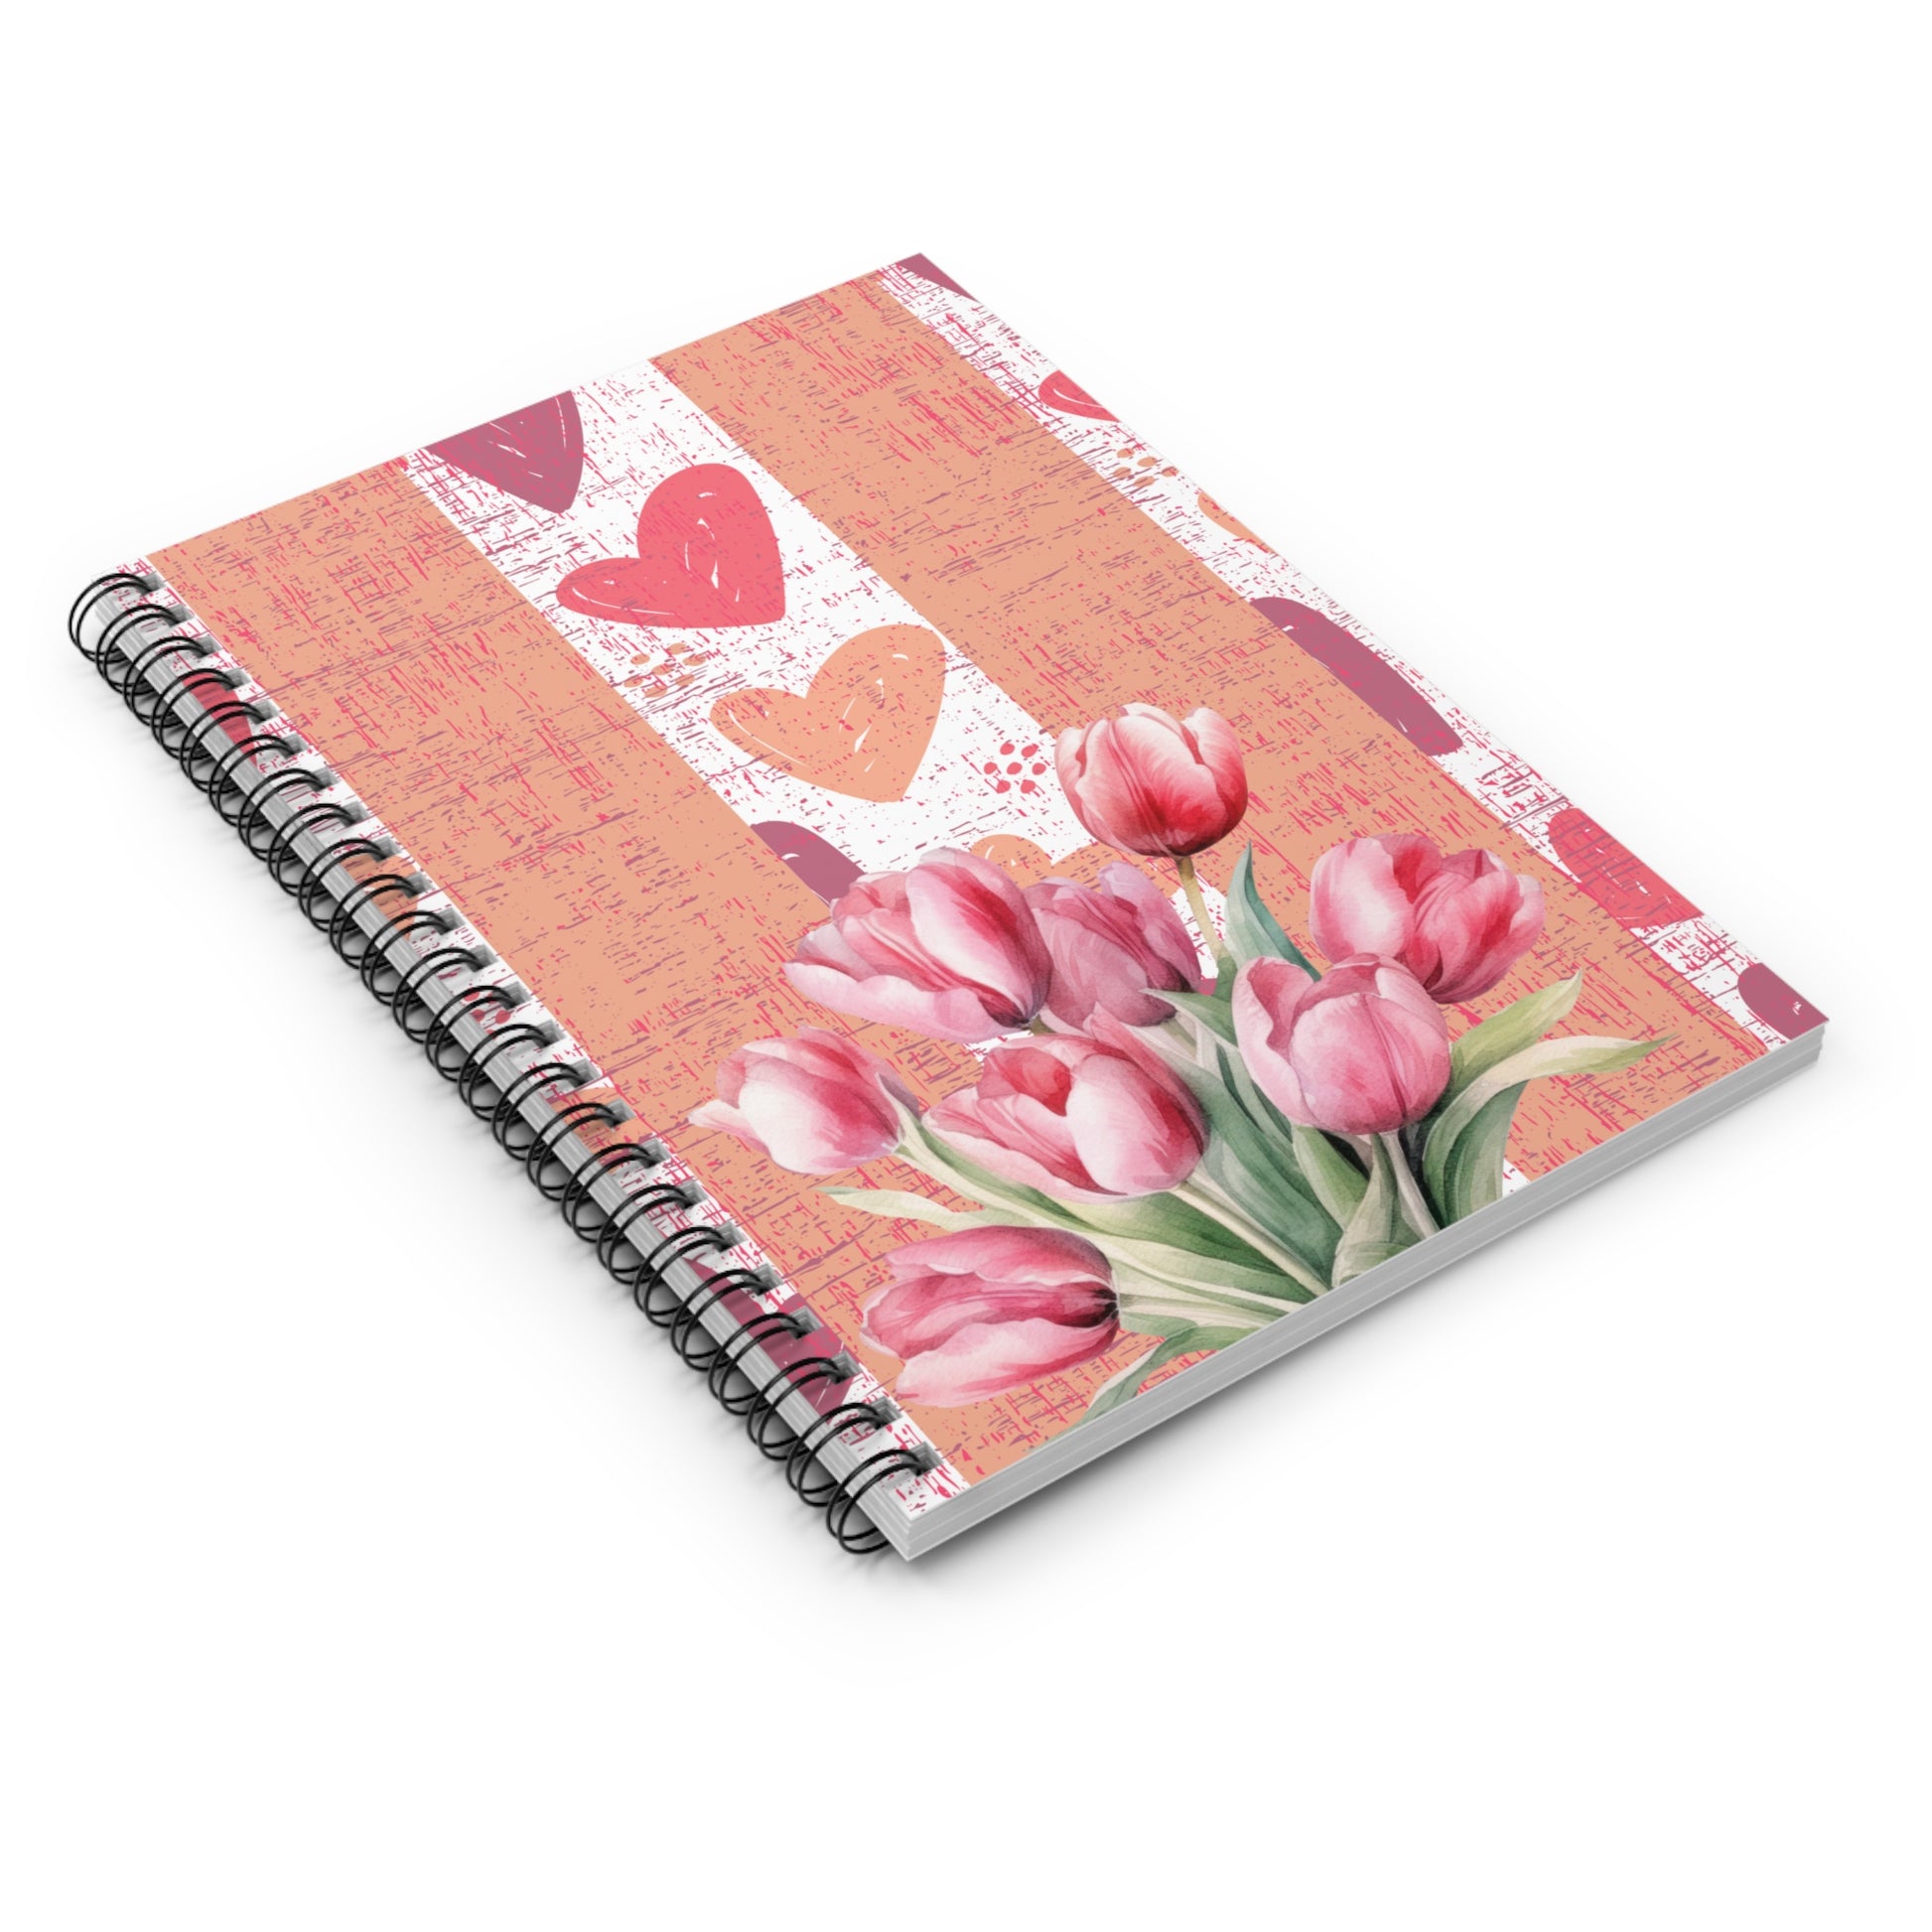 Harmony of Hearts and Tulips: Spiral Notebook for Love-Infused Reflections and Creative Expression - Eddy and Rita